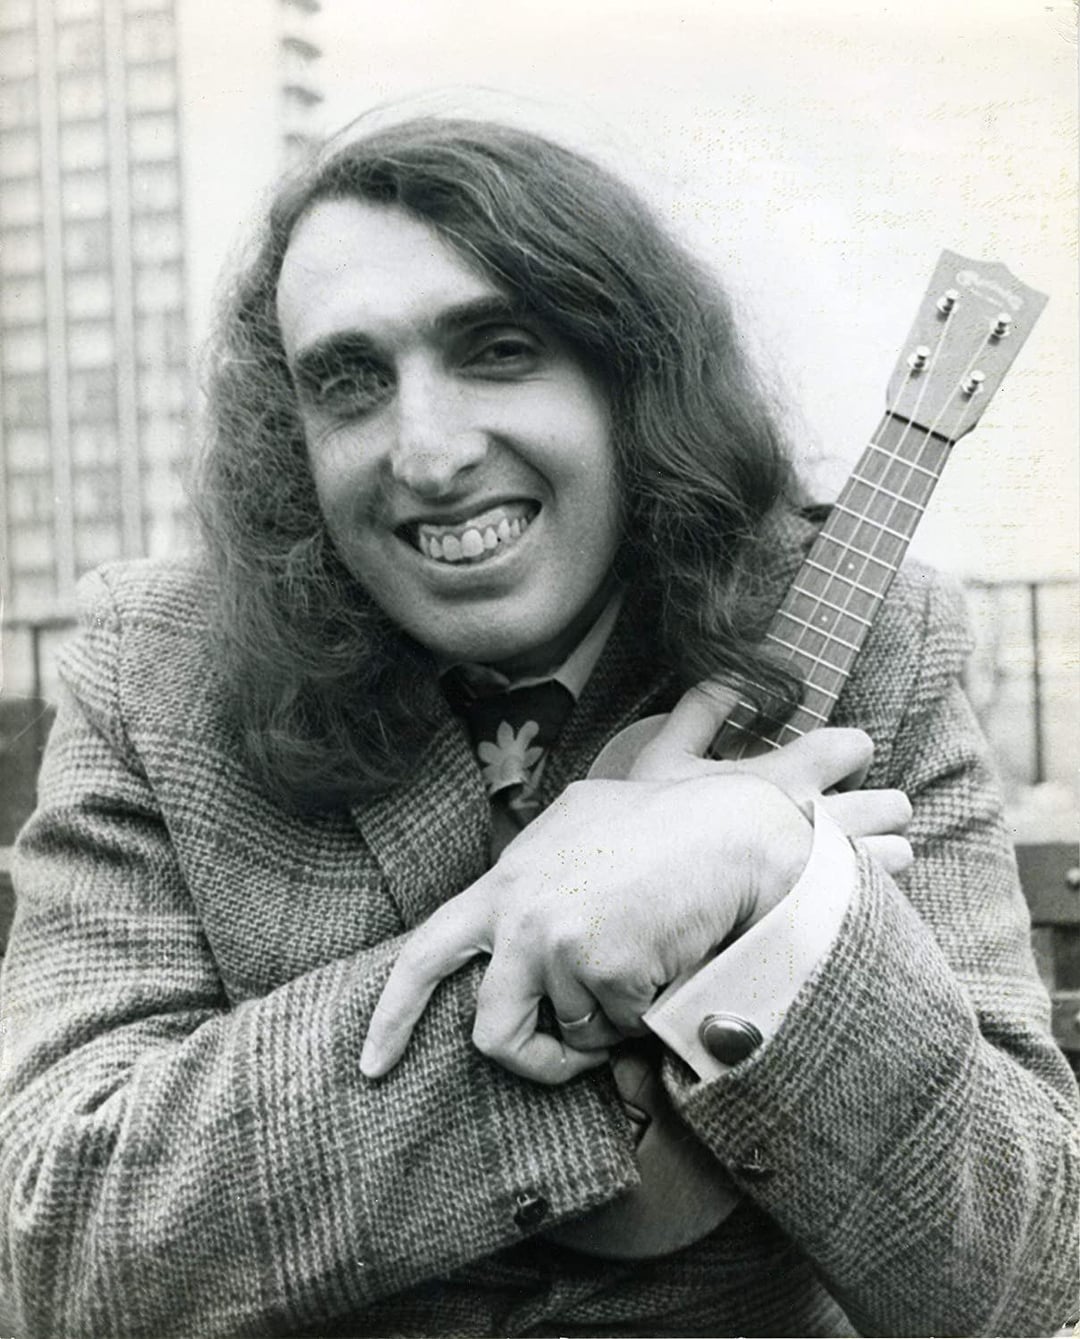 An appreciation post for Tiny Tim. I feel sad watching old shows when  they'd bring him on and basically laugh at him for playing and singing the  way he did. I think